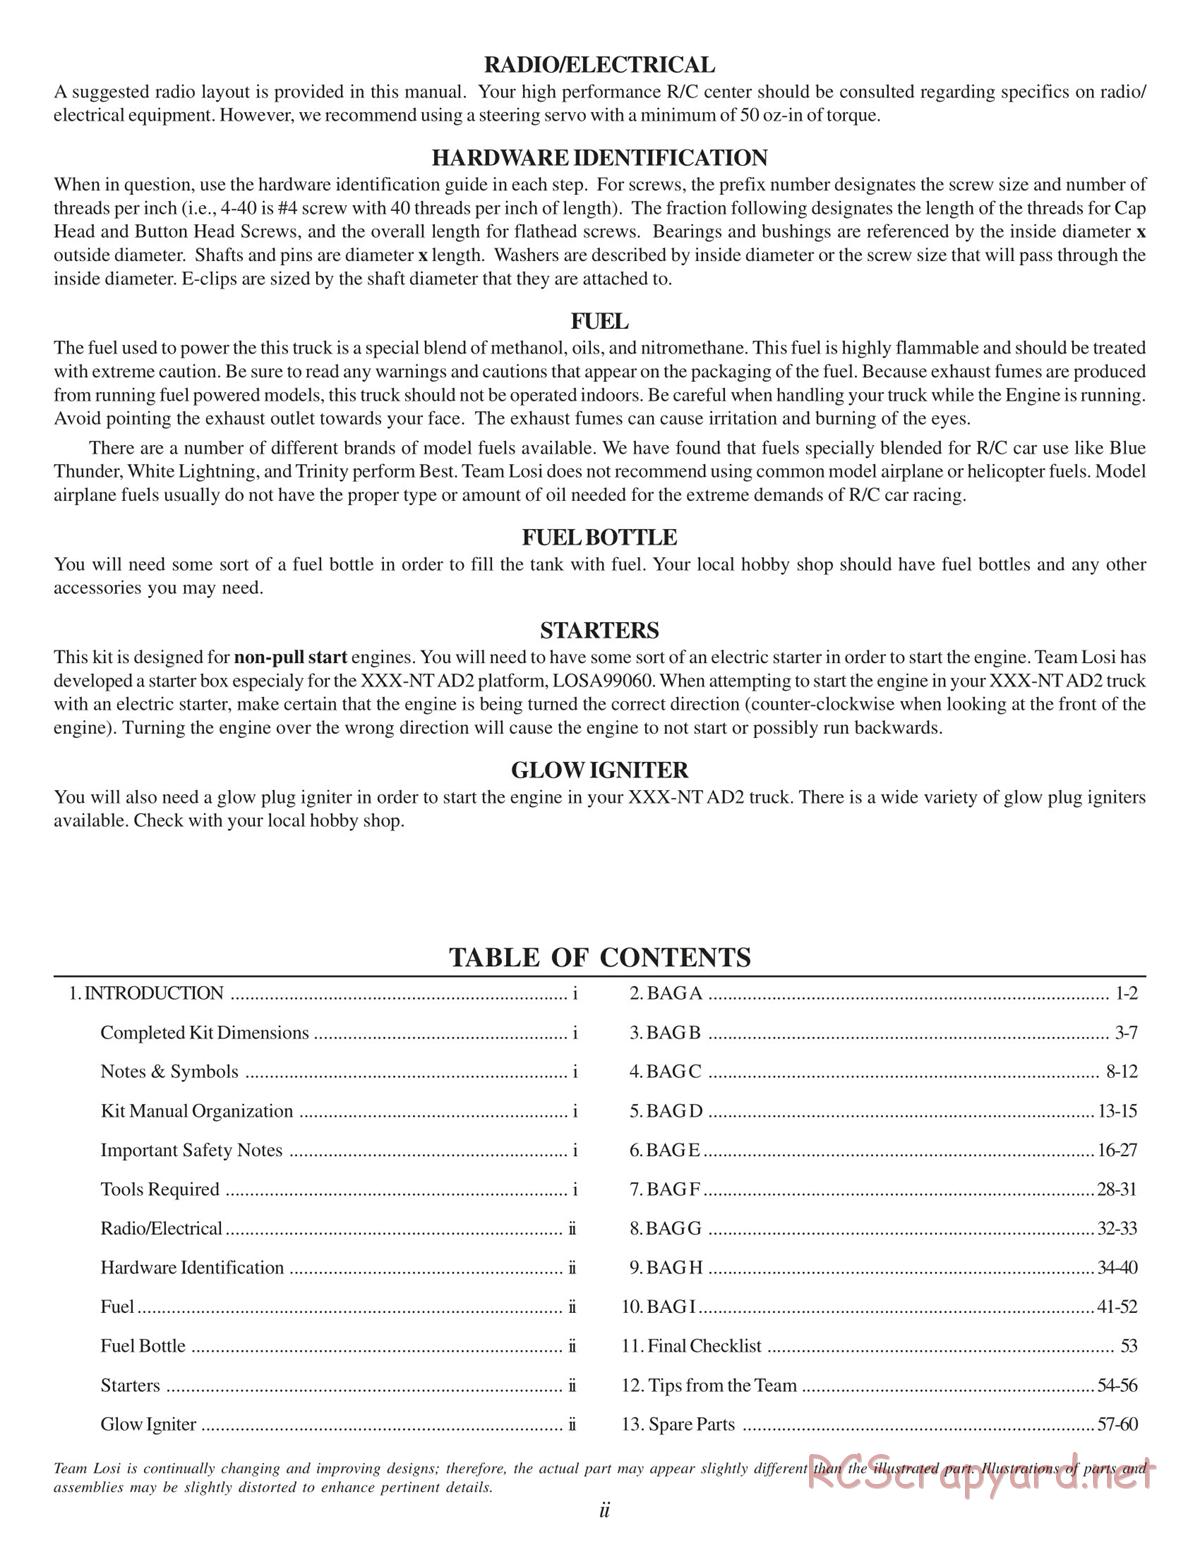 Team Losi - XXX NT AD2 - Manual - Page 3